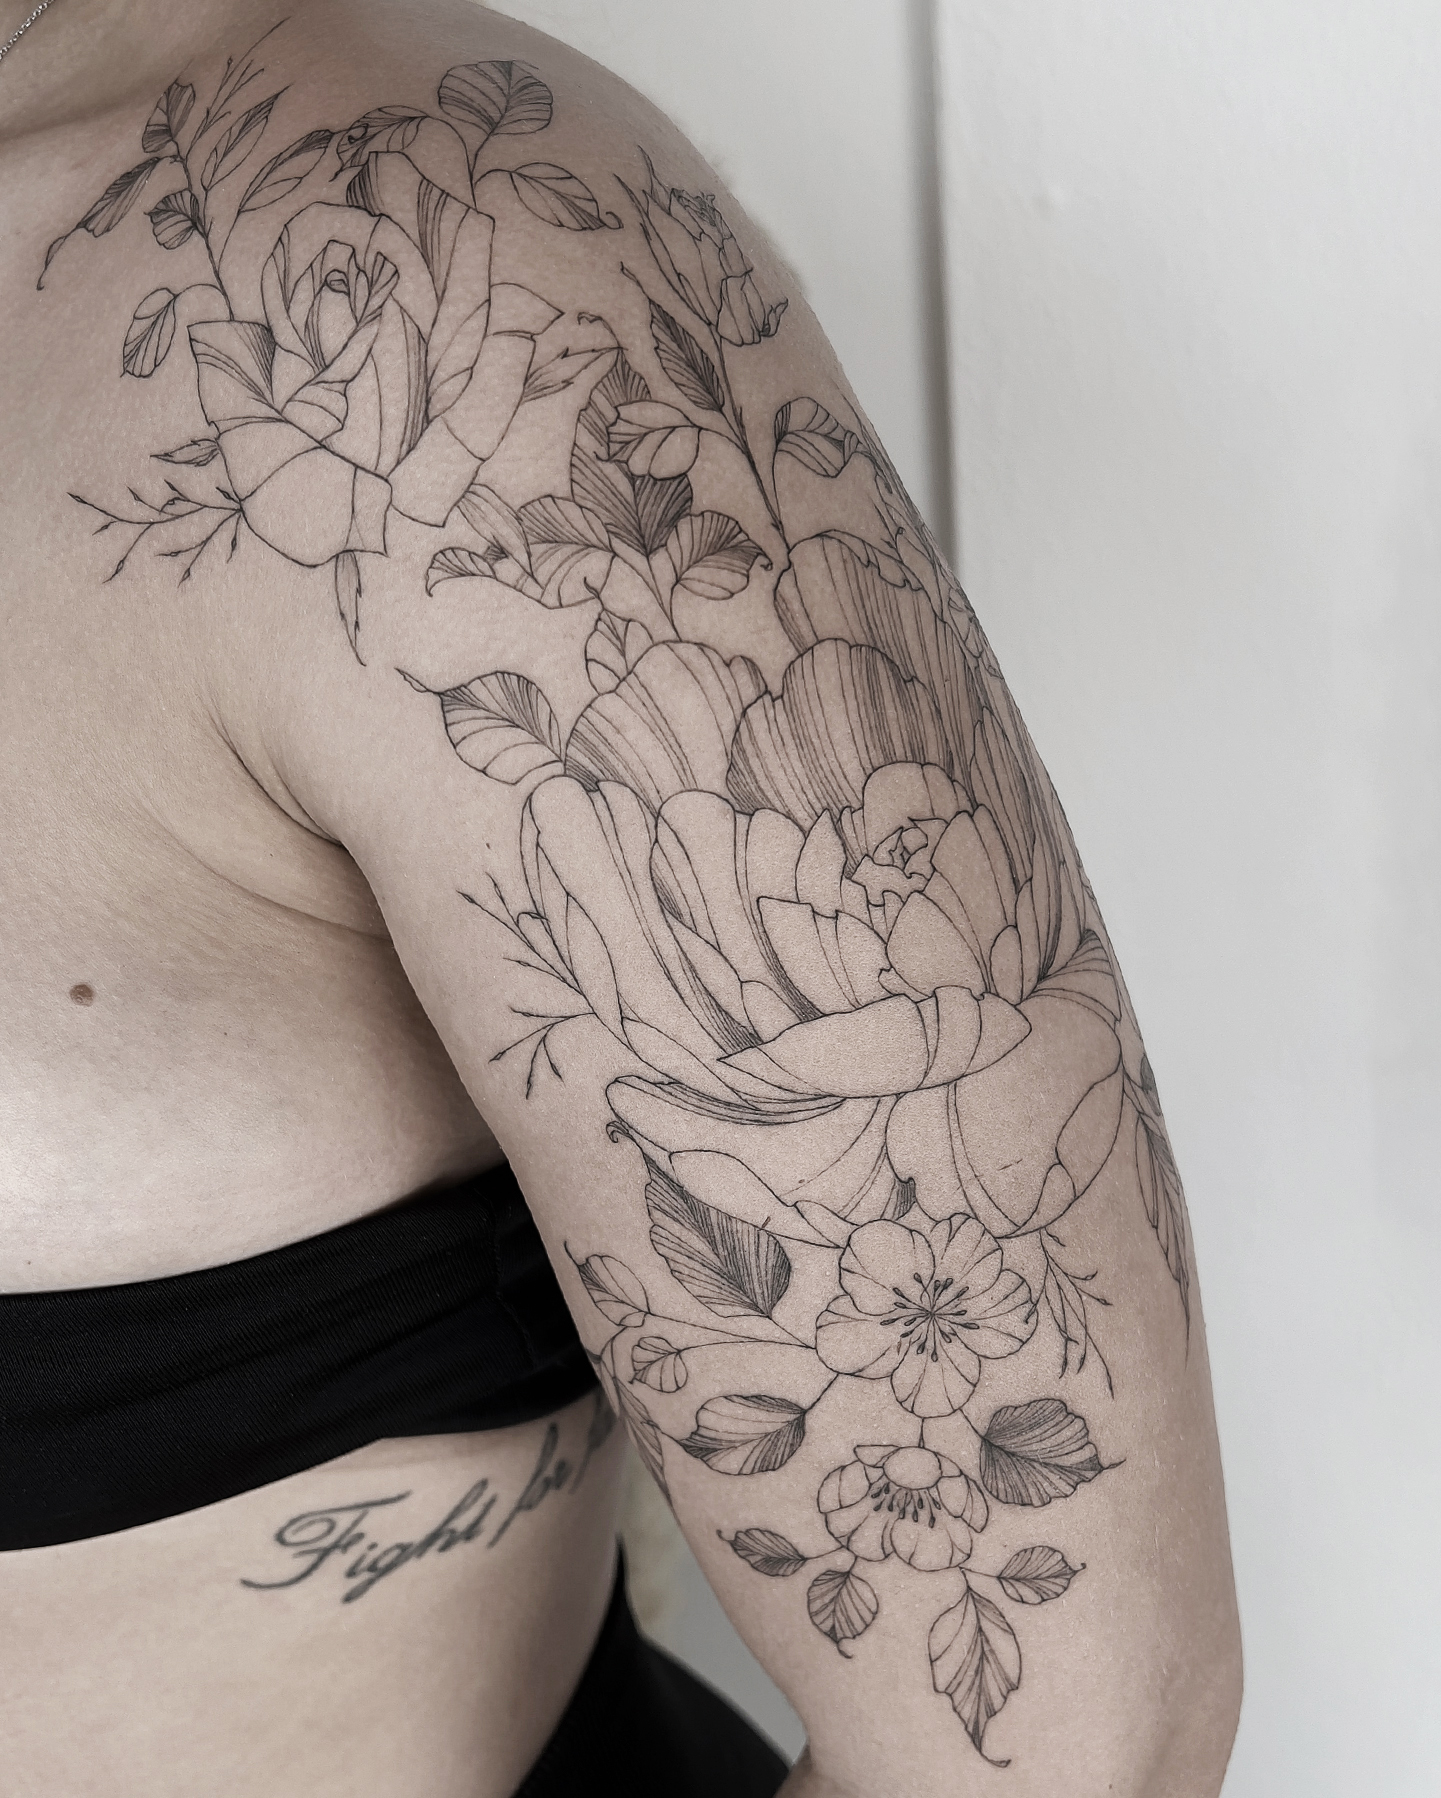 upper arm fineline flower tattoo with peony and rose from smasli ink an female tattoo artist working in salzburg austria